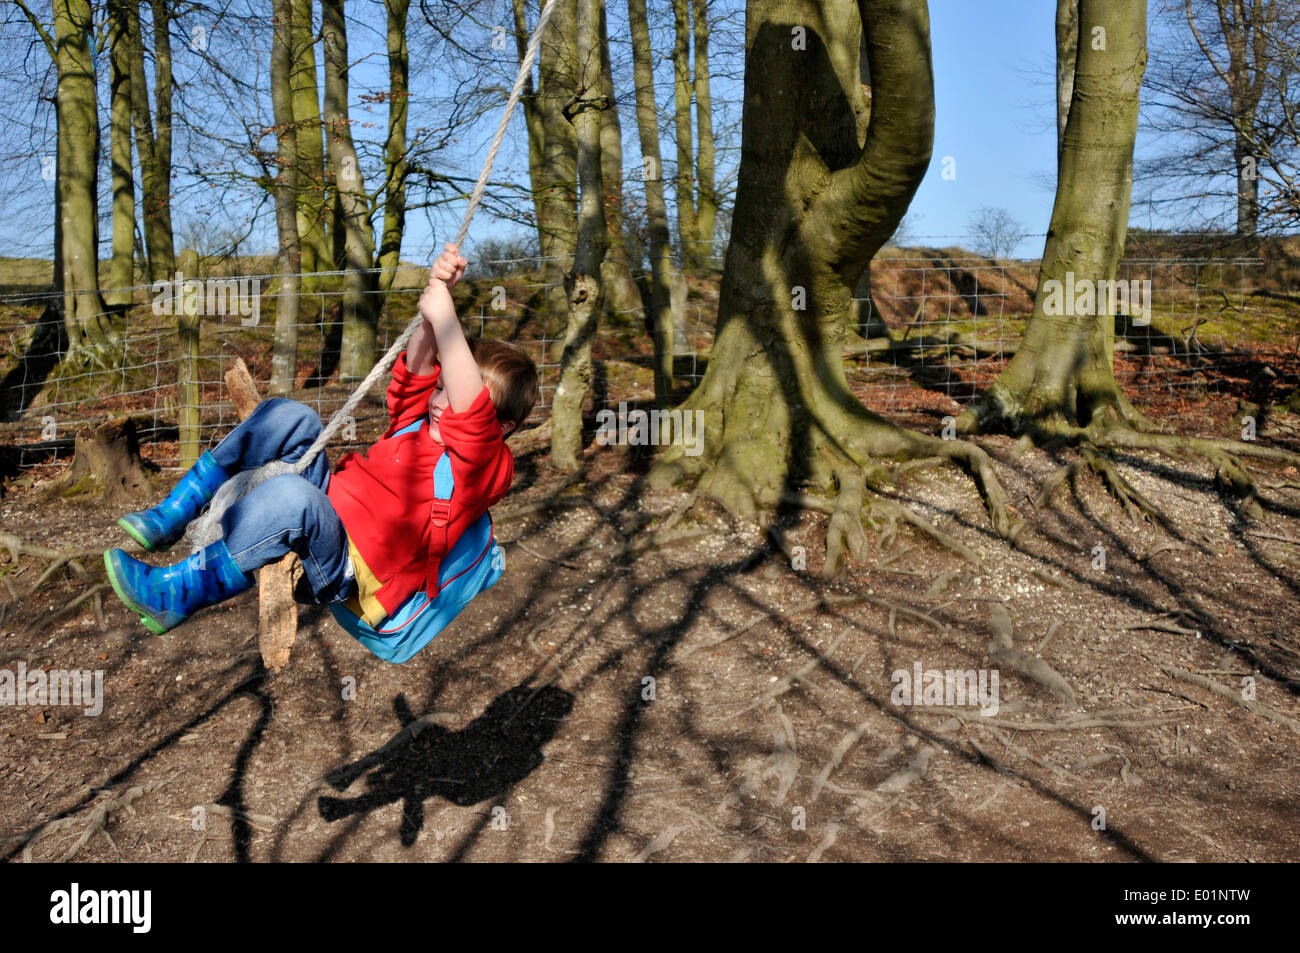 young boy swinging on a rope swing in the trees Stock Photo